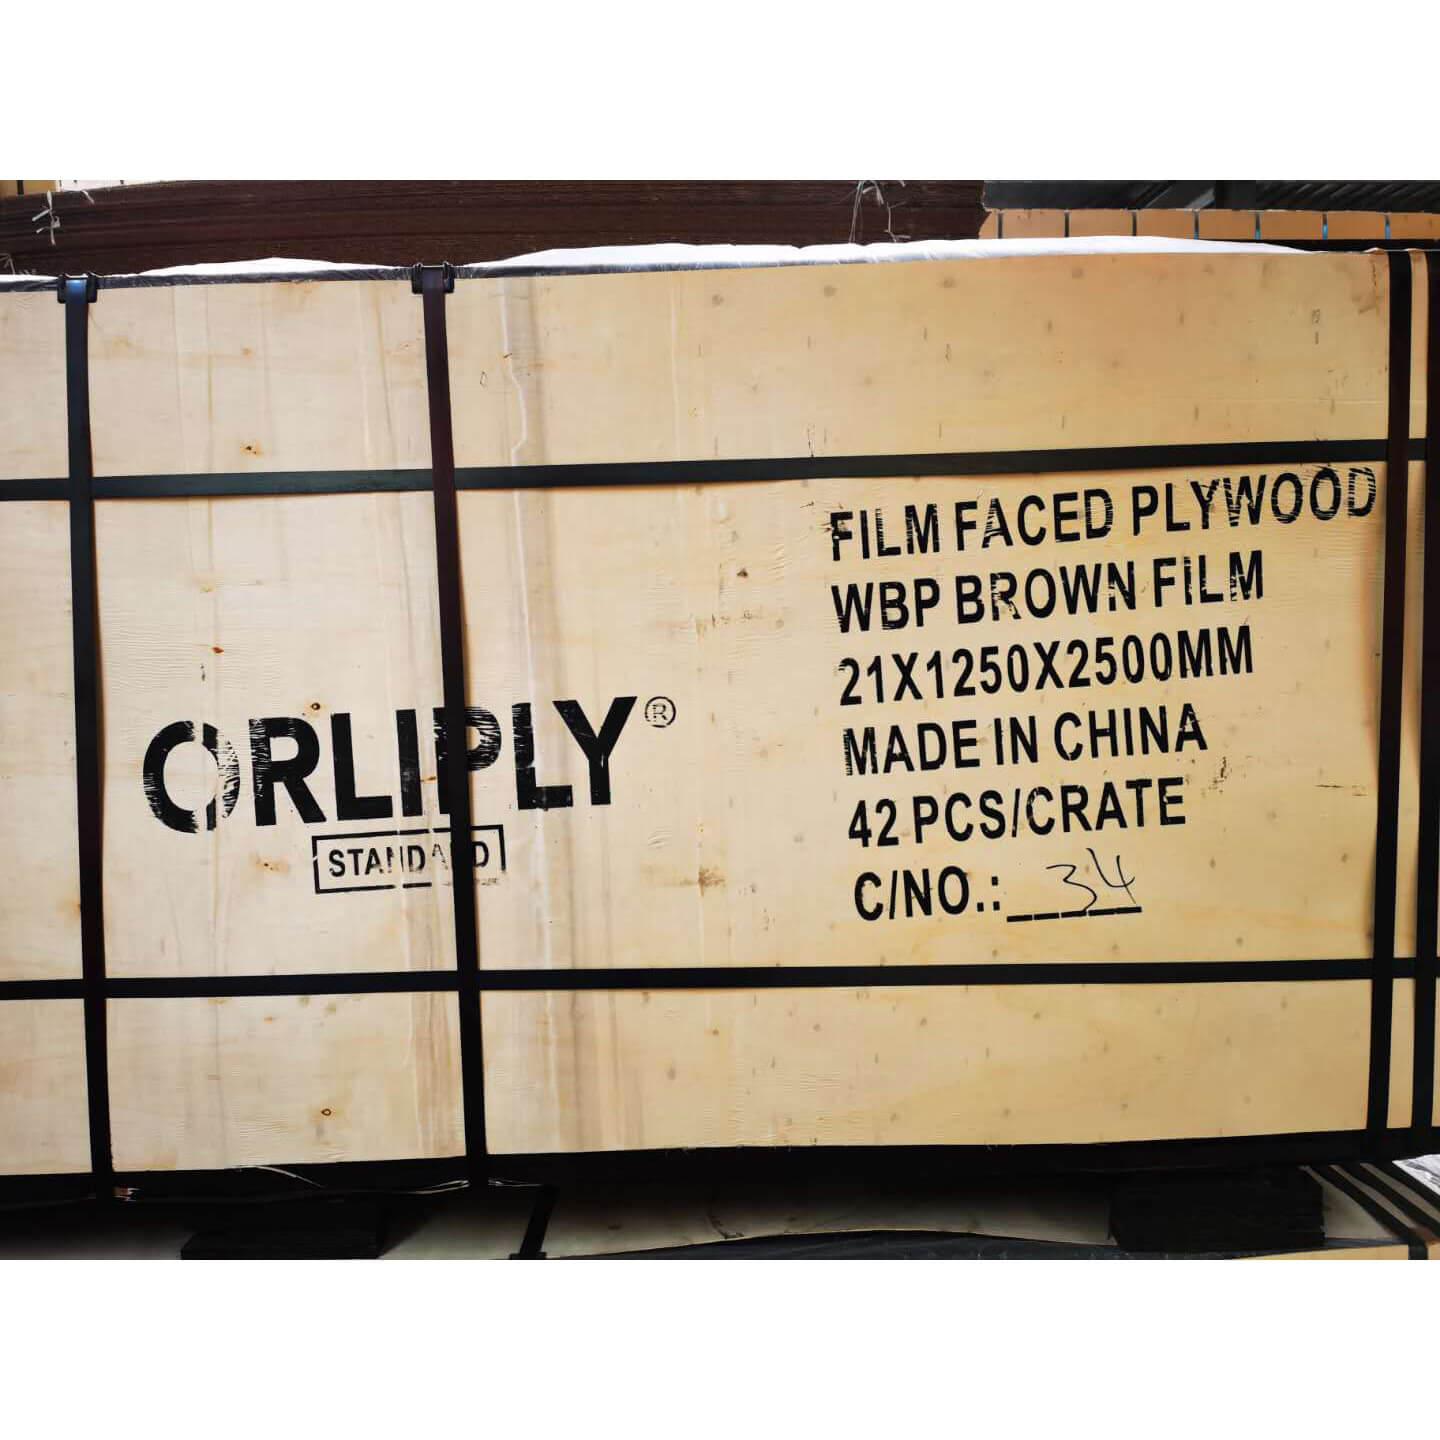 18mm film faced plywood 